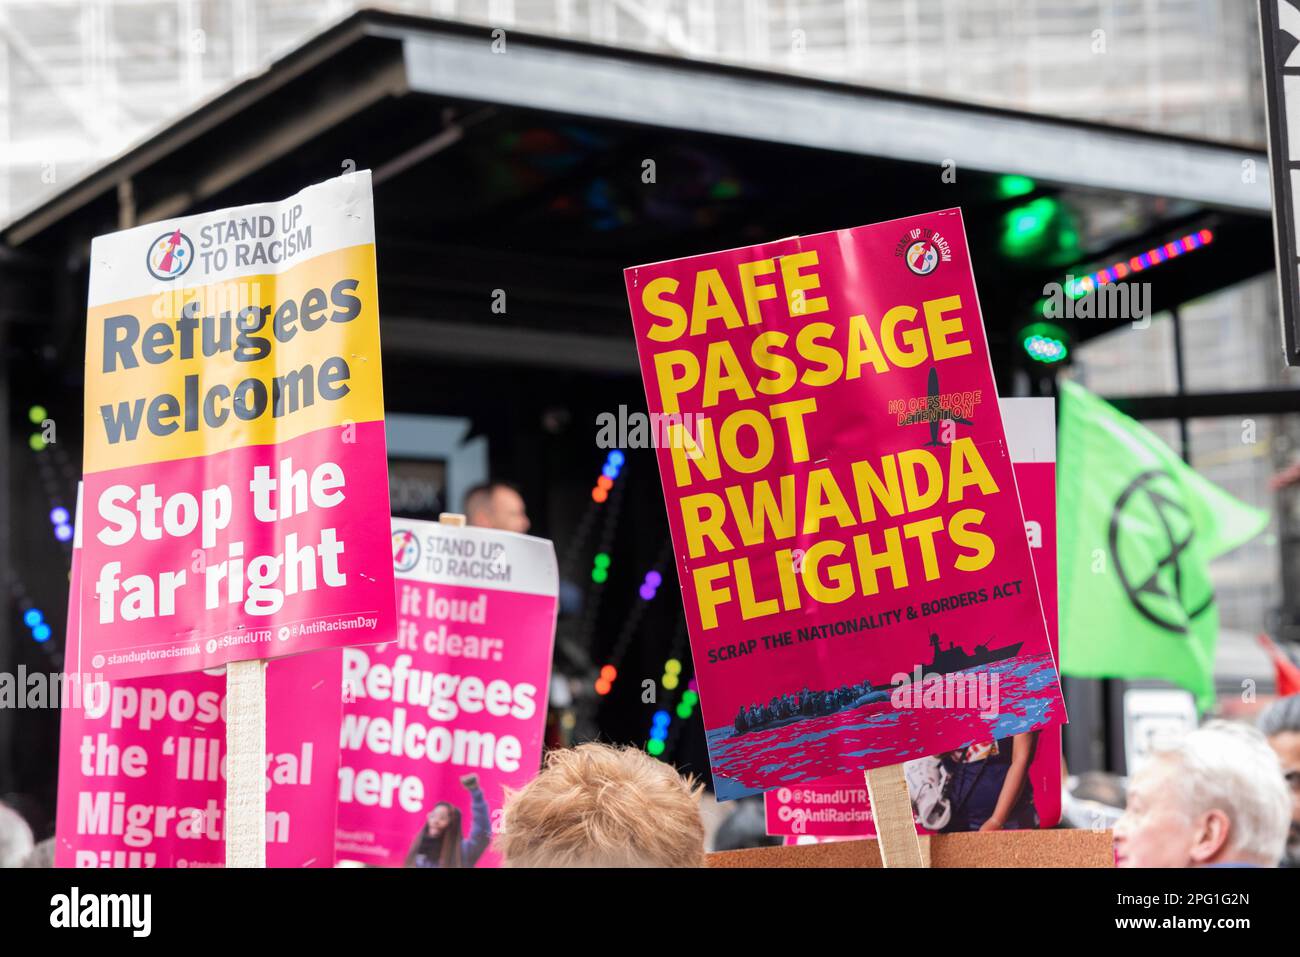 Protest taking place in London on UN Anti Racism Day. Stand up to Racism. Rwanda flights placard Stock Photo